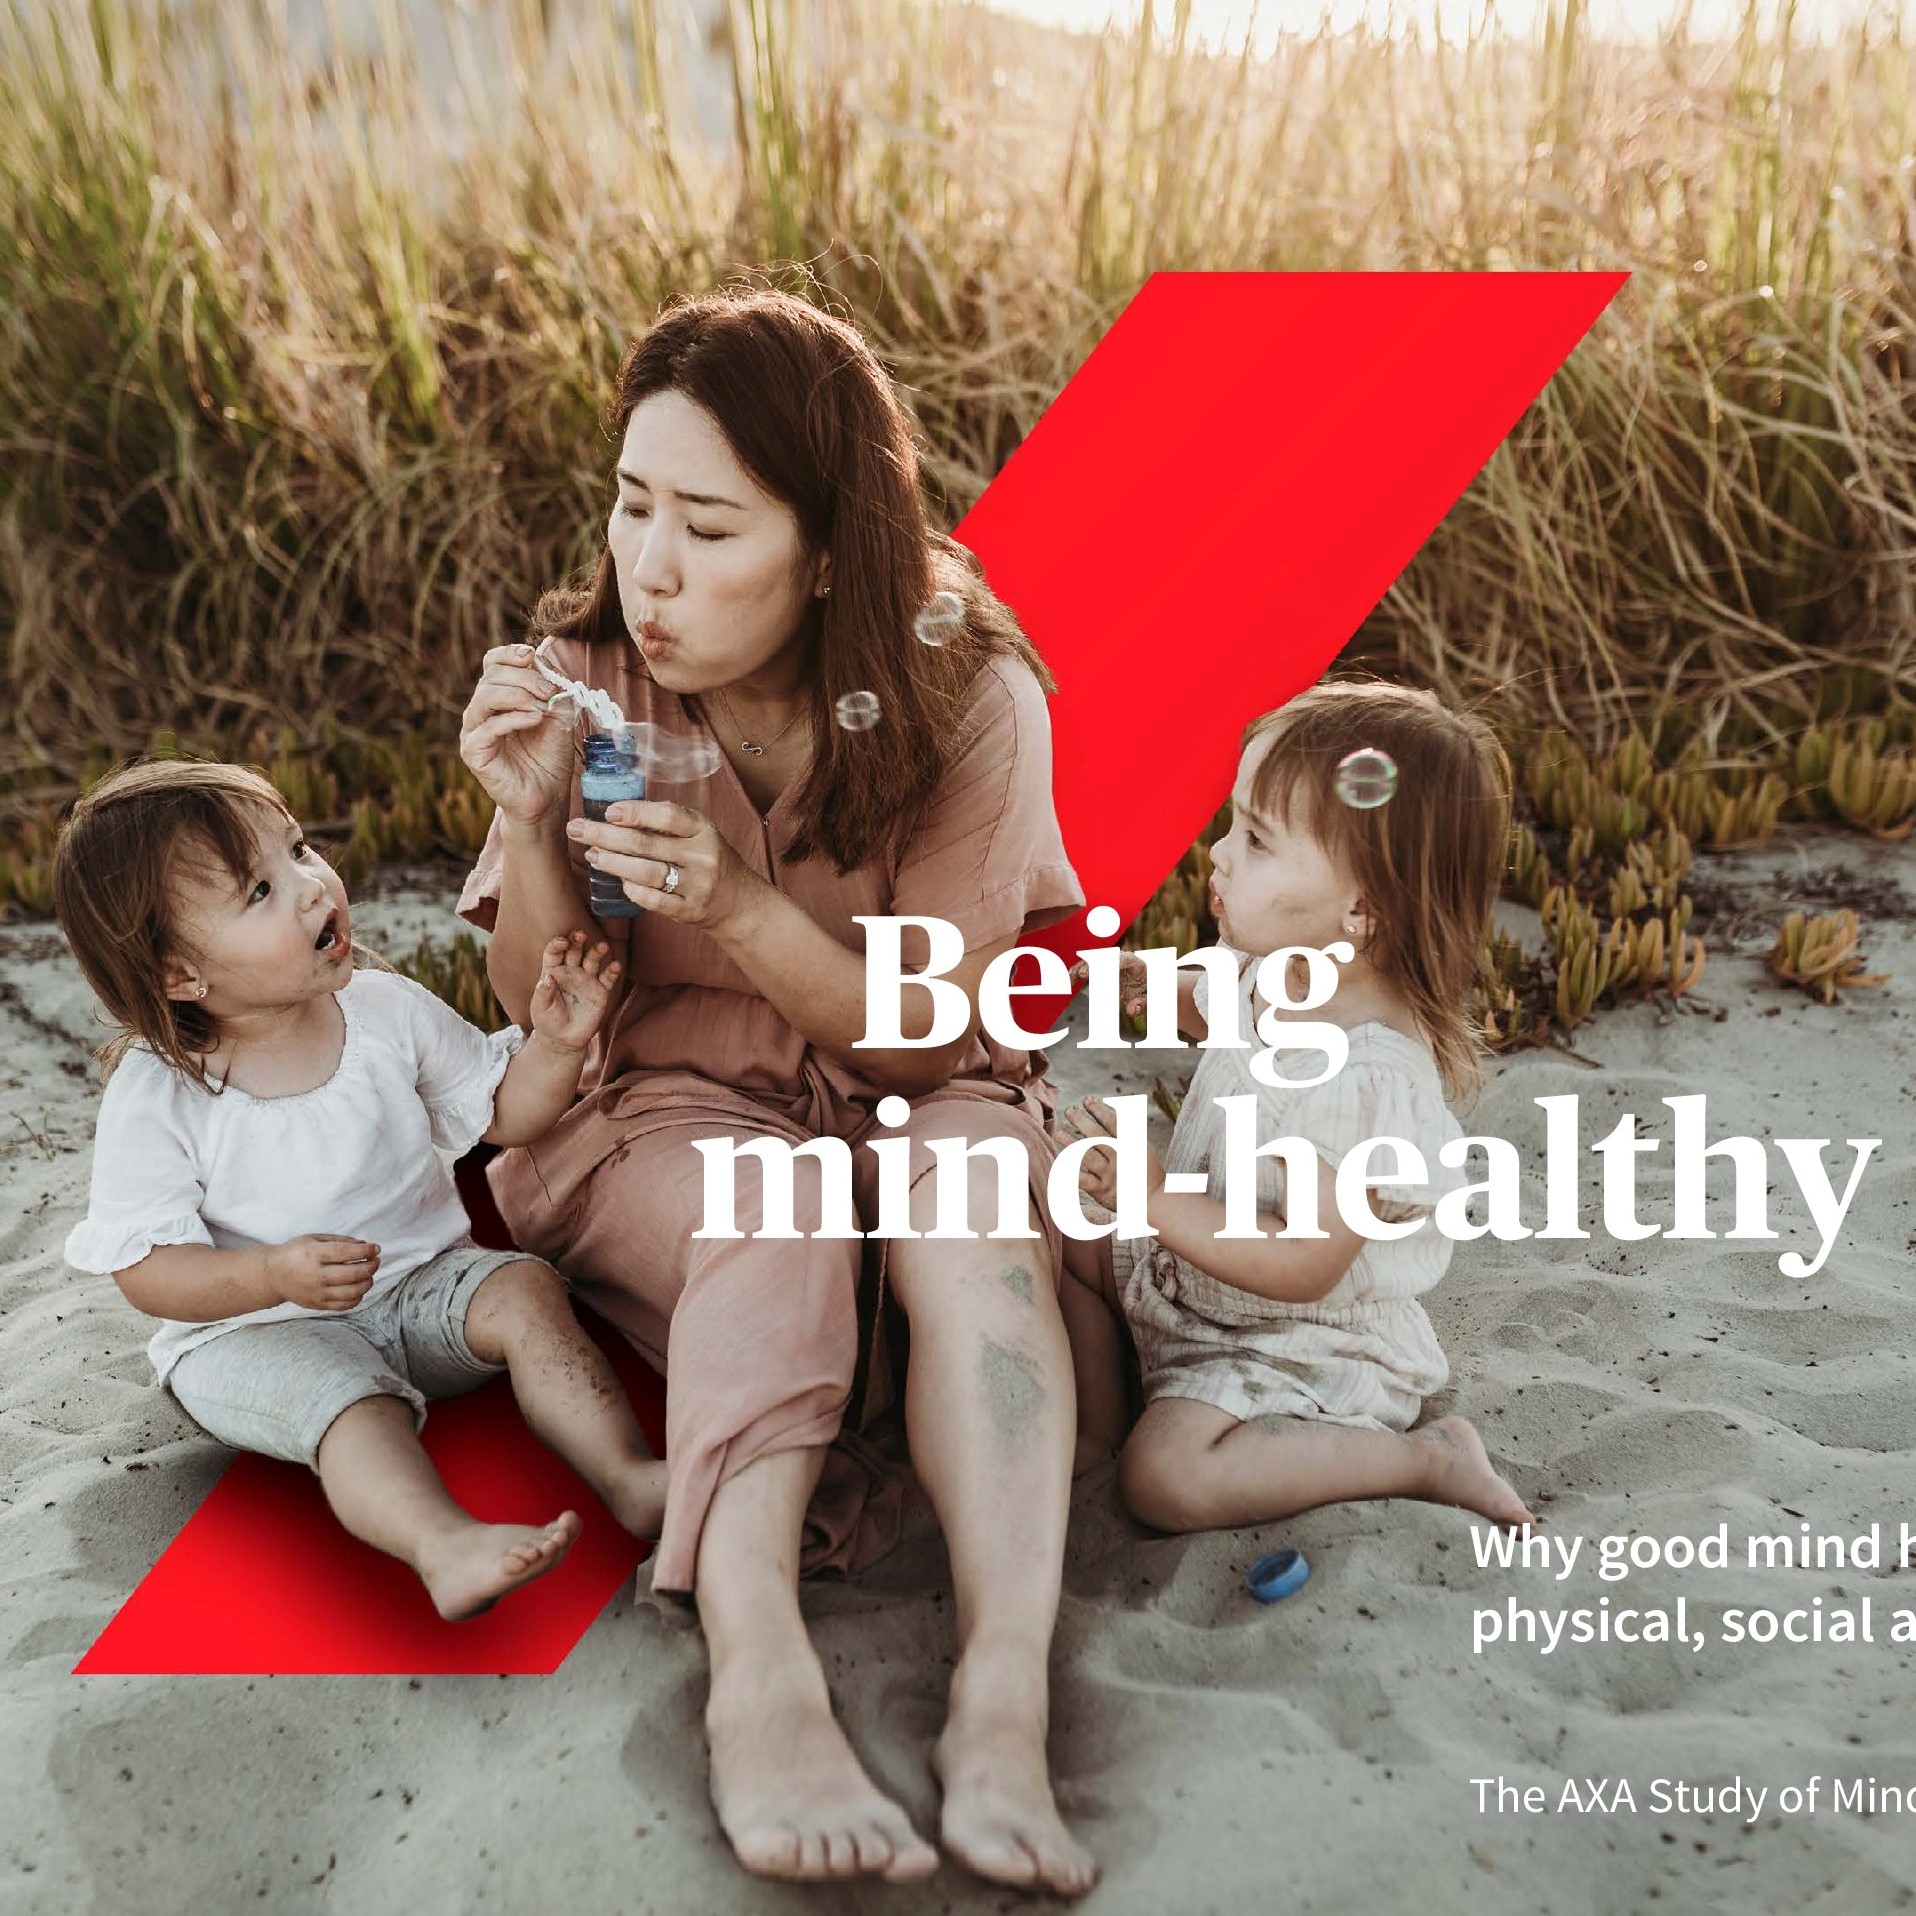 The AXA Study of Mind Health and Wellbeing in 2022